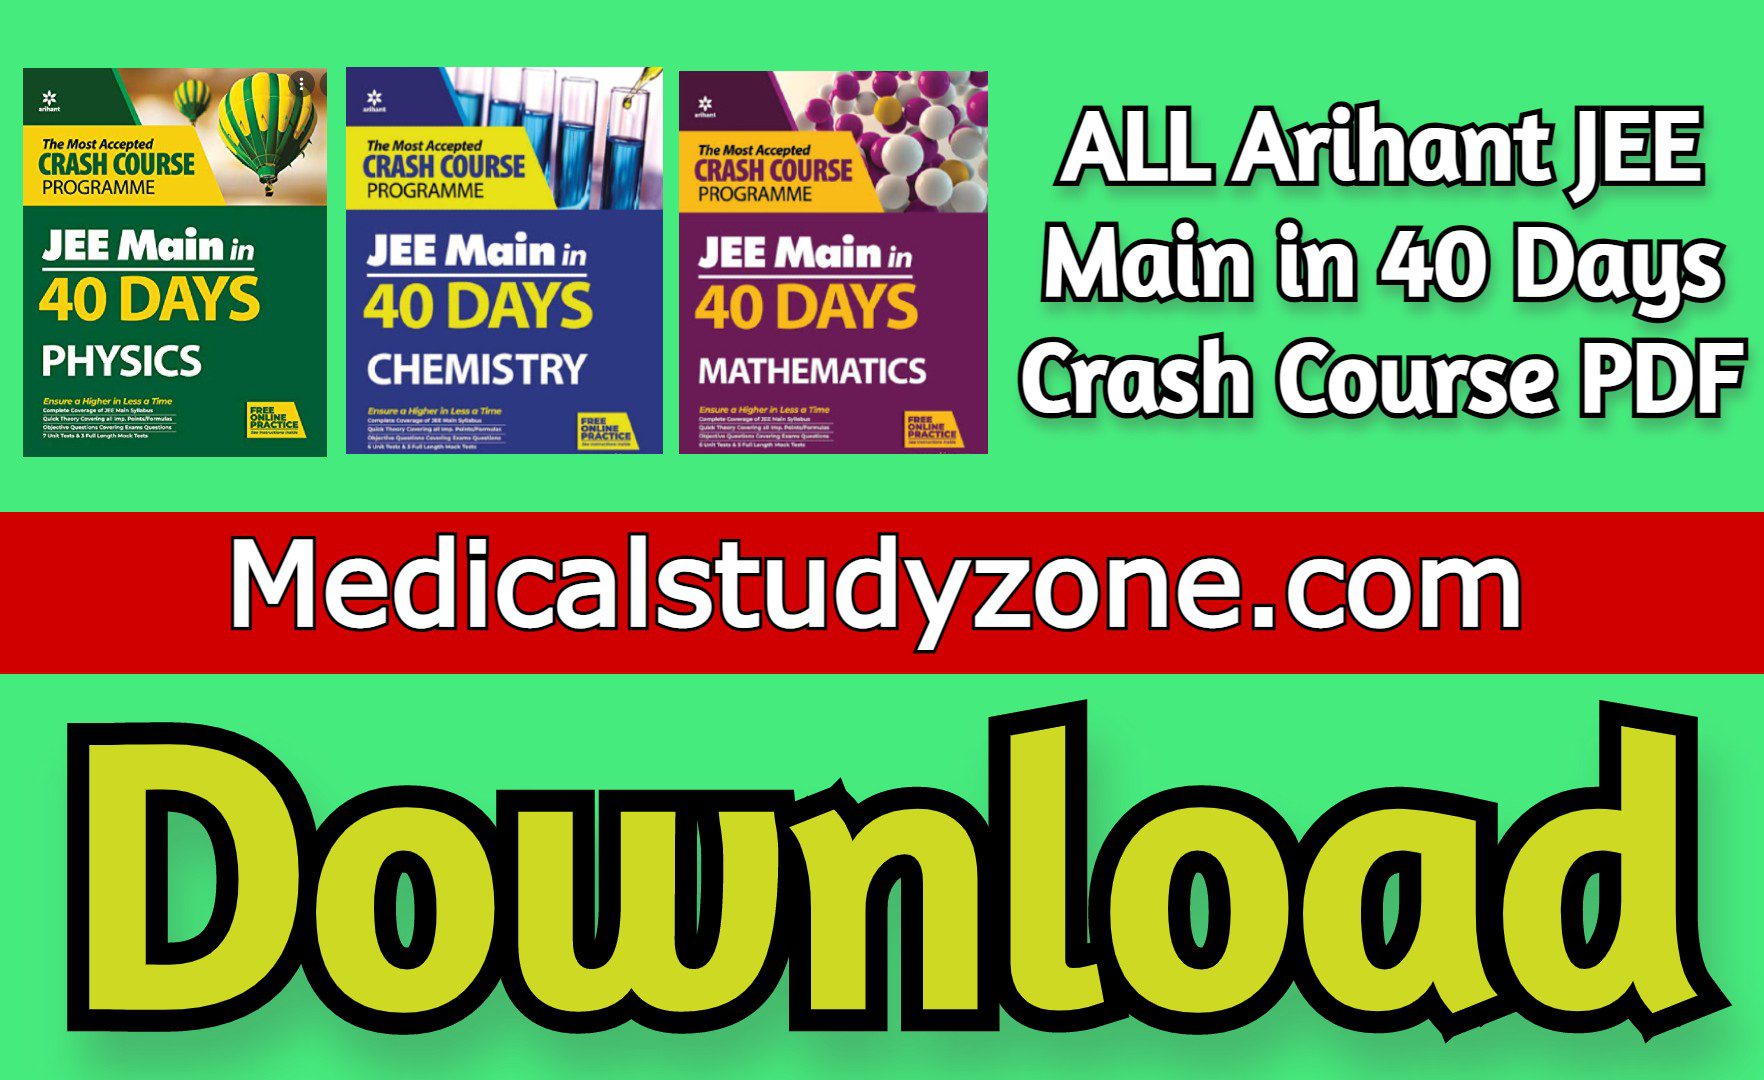 ALL Arihant JEE Main in 40 Days Crash Course PDF Free Download